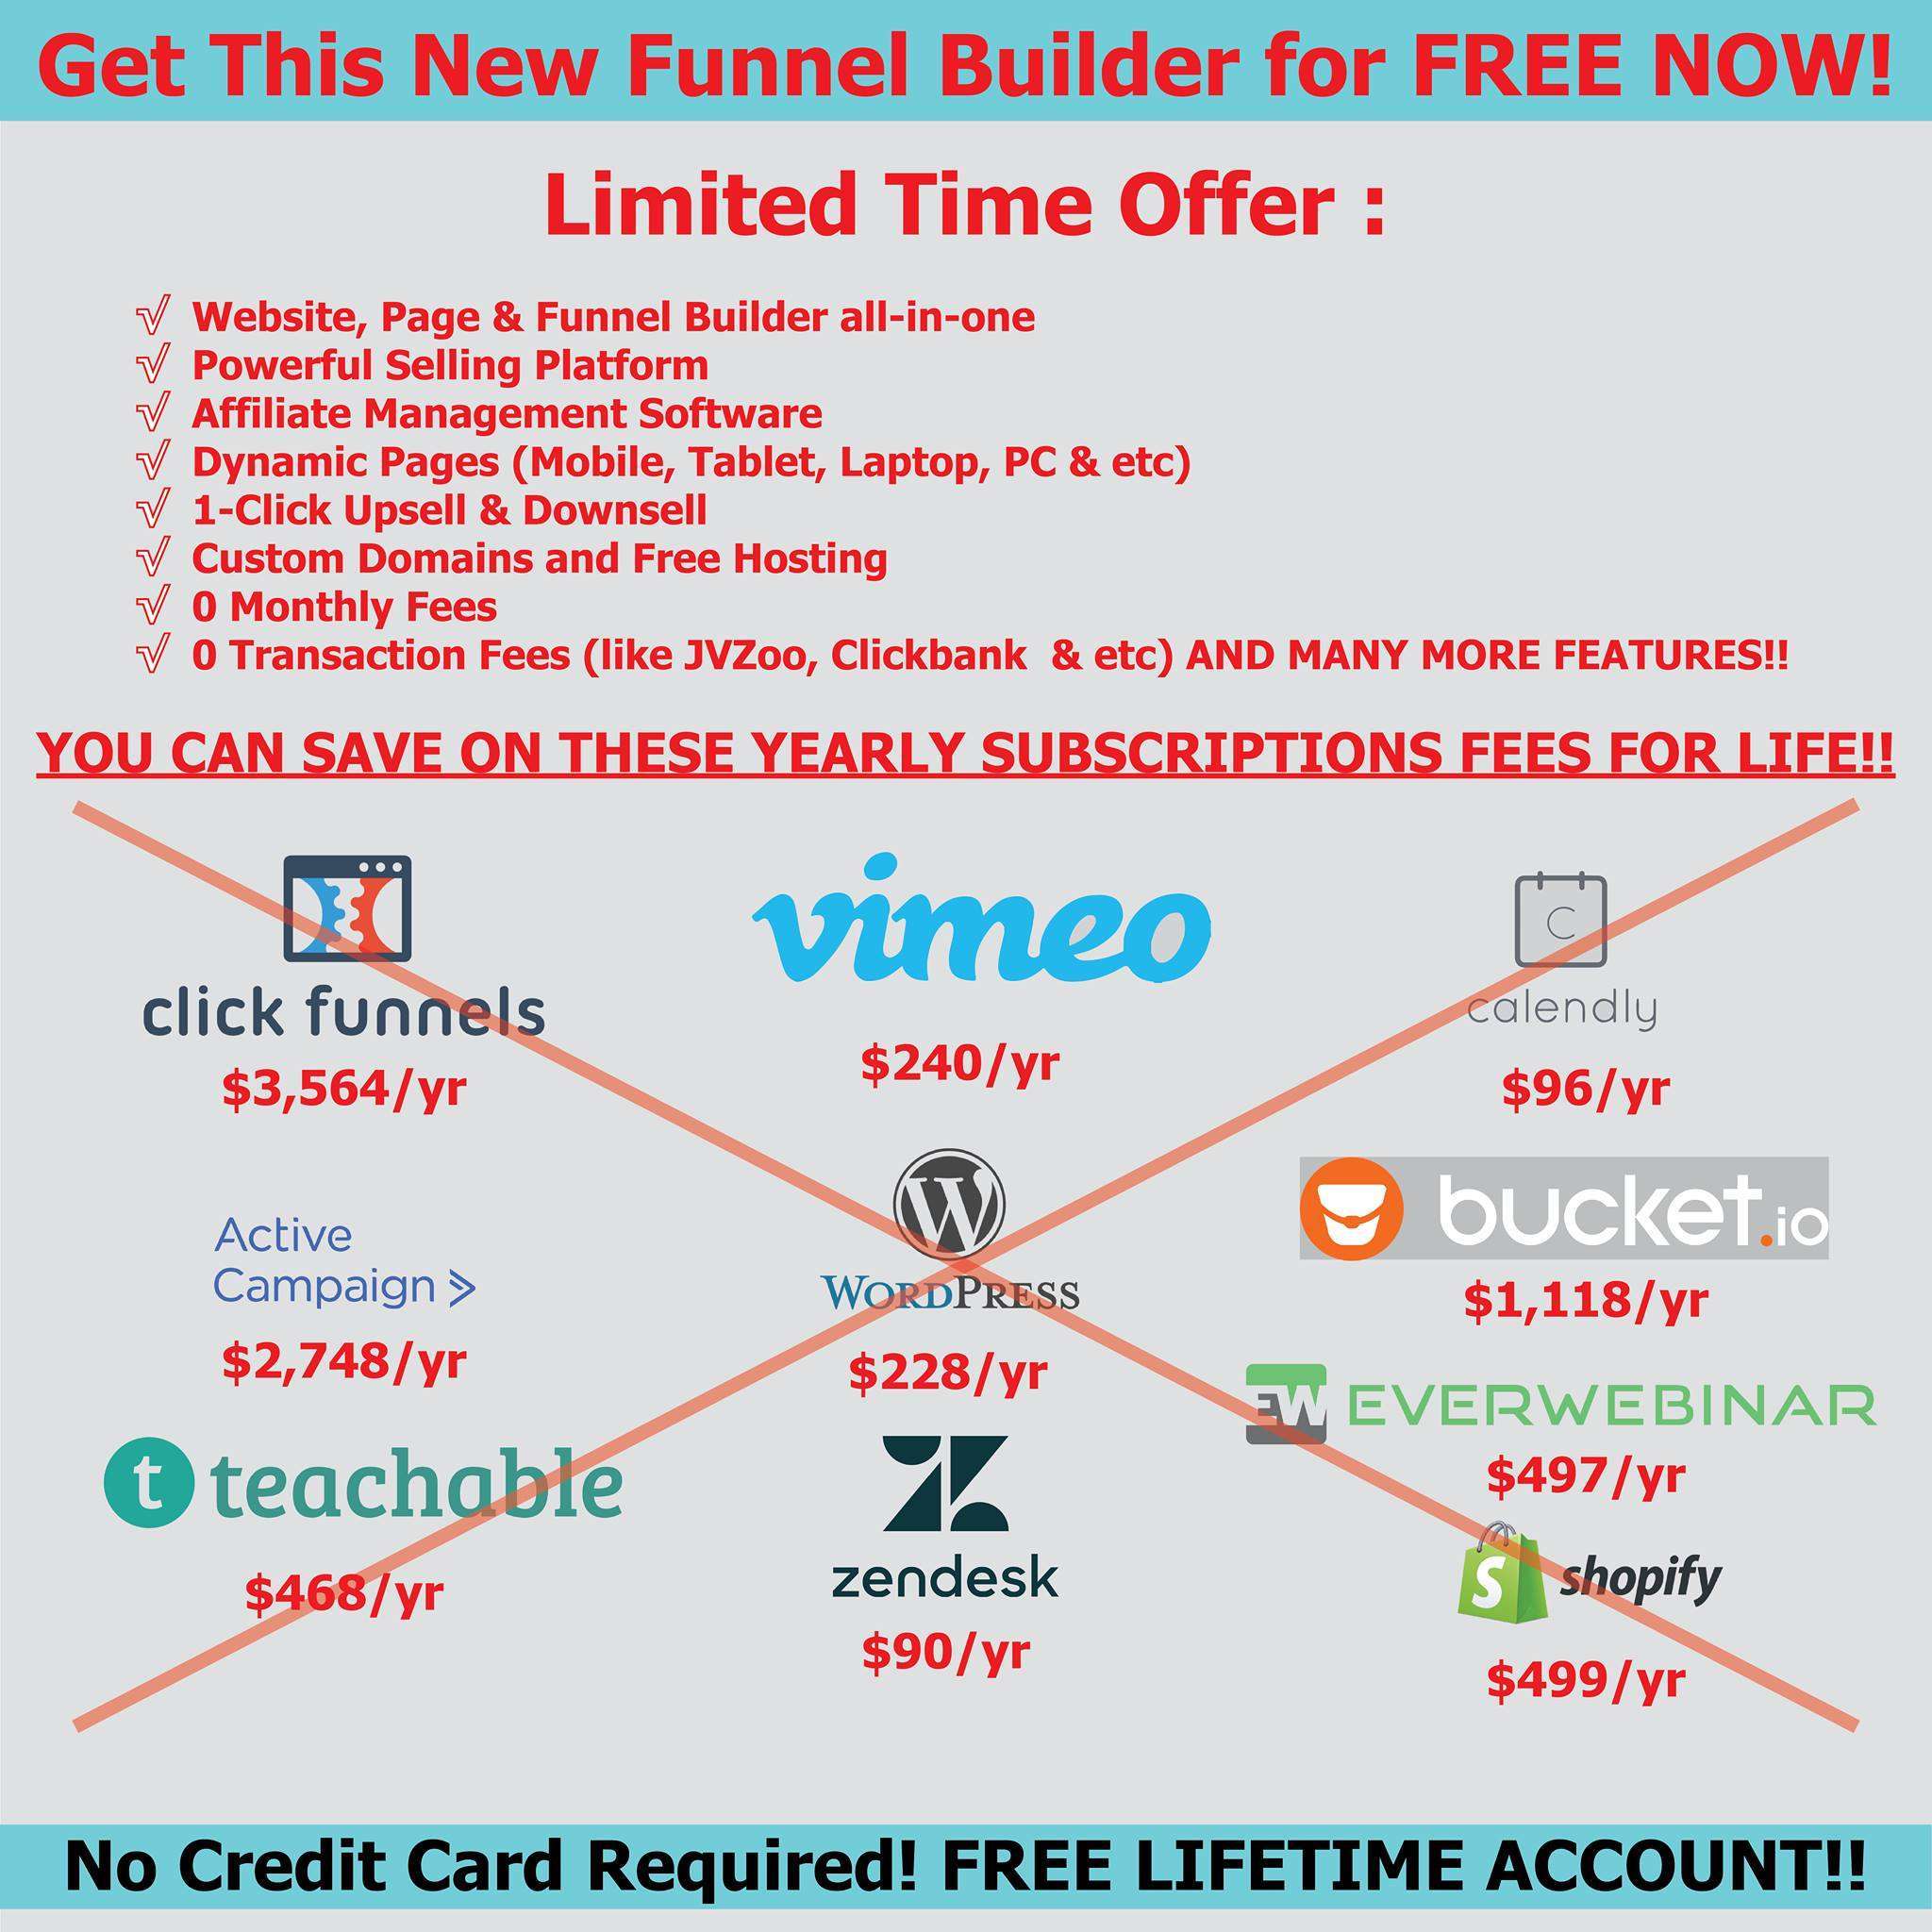 How Groovefunnels Review - Do Not Buy This Without Reading... can Save You Time, Stress, and Money.